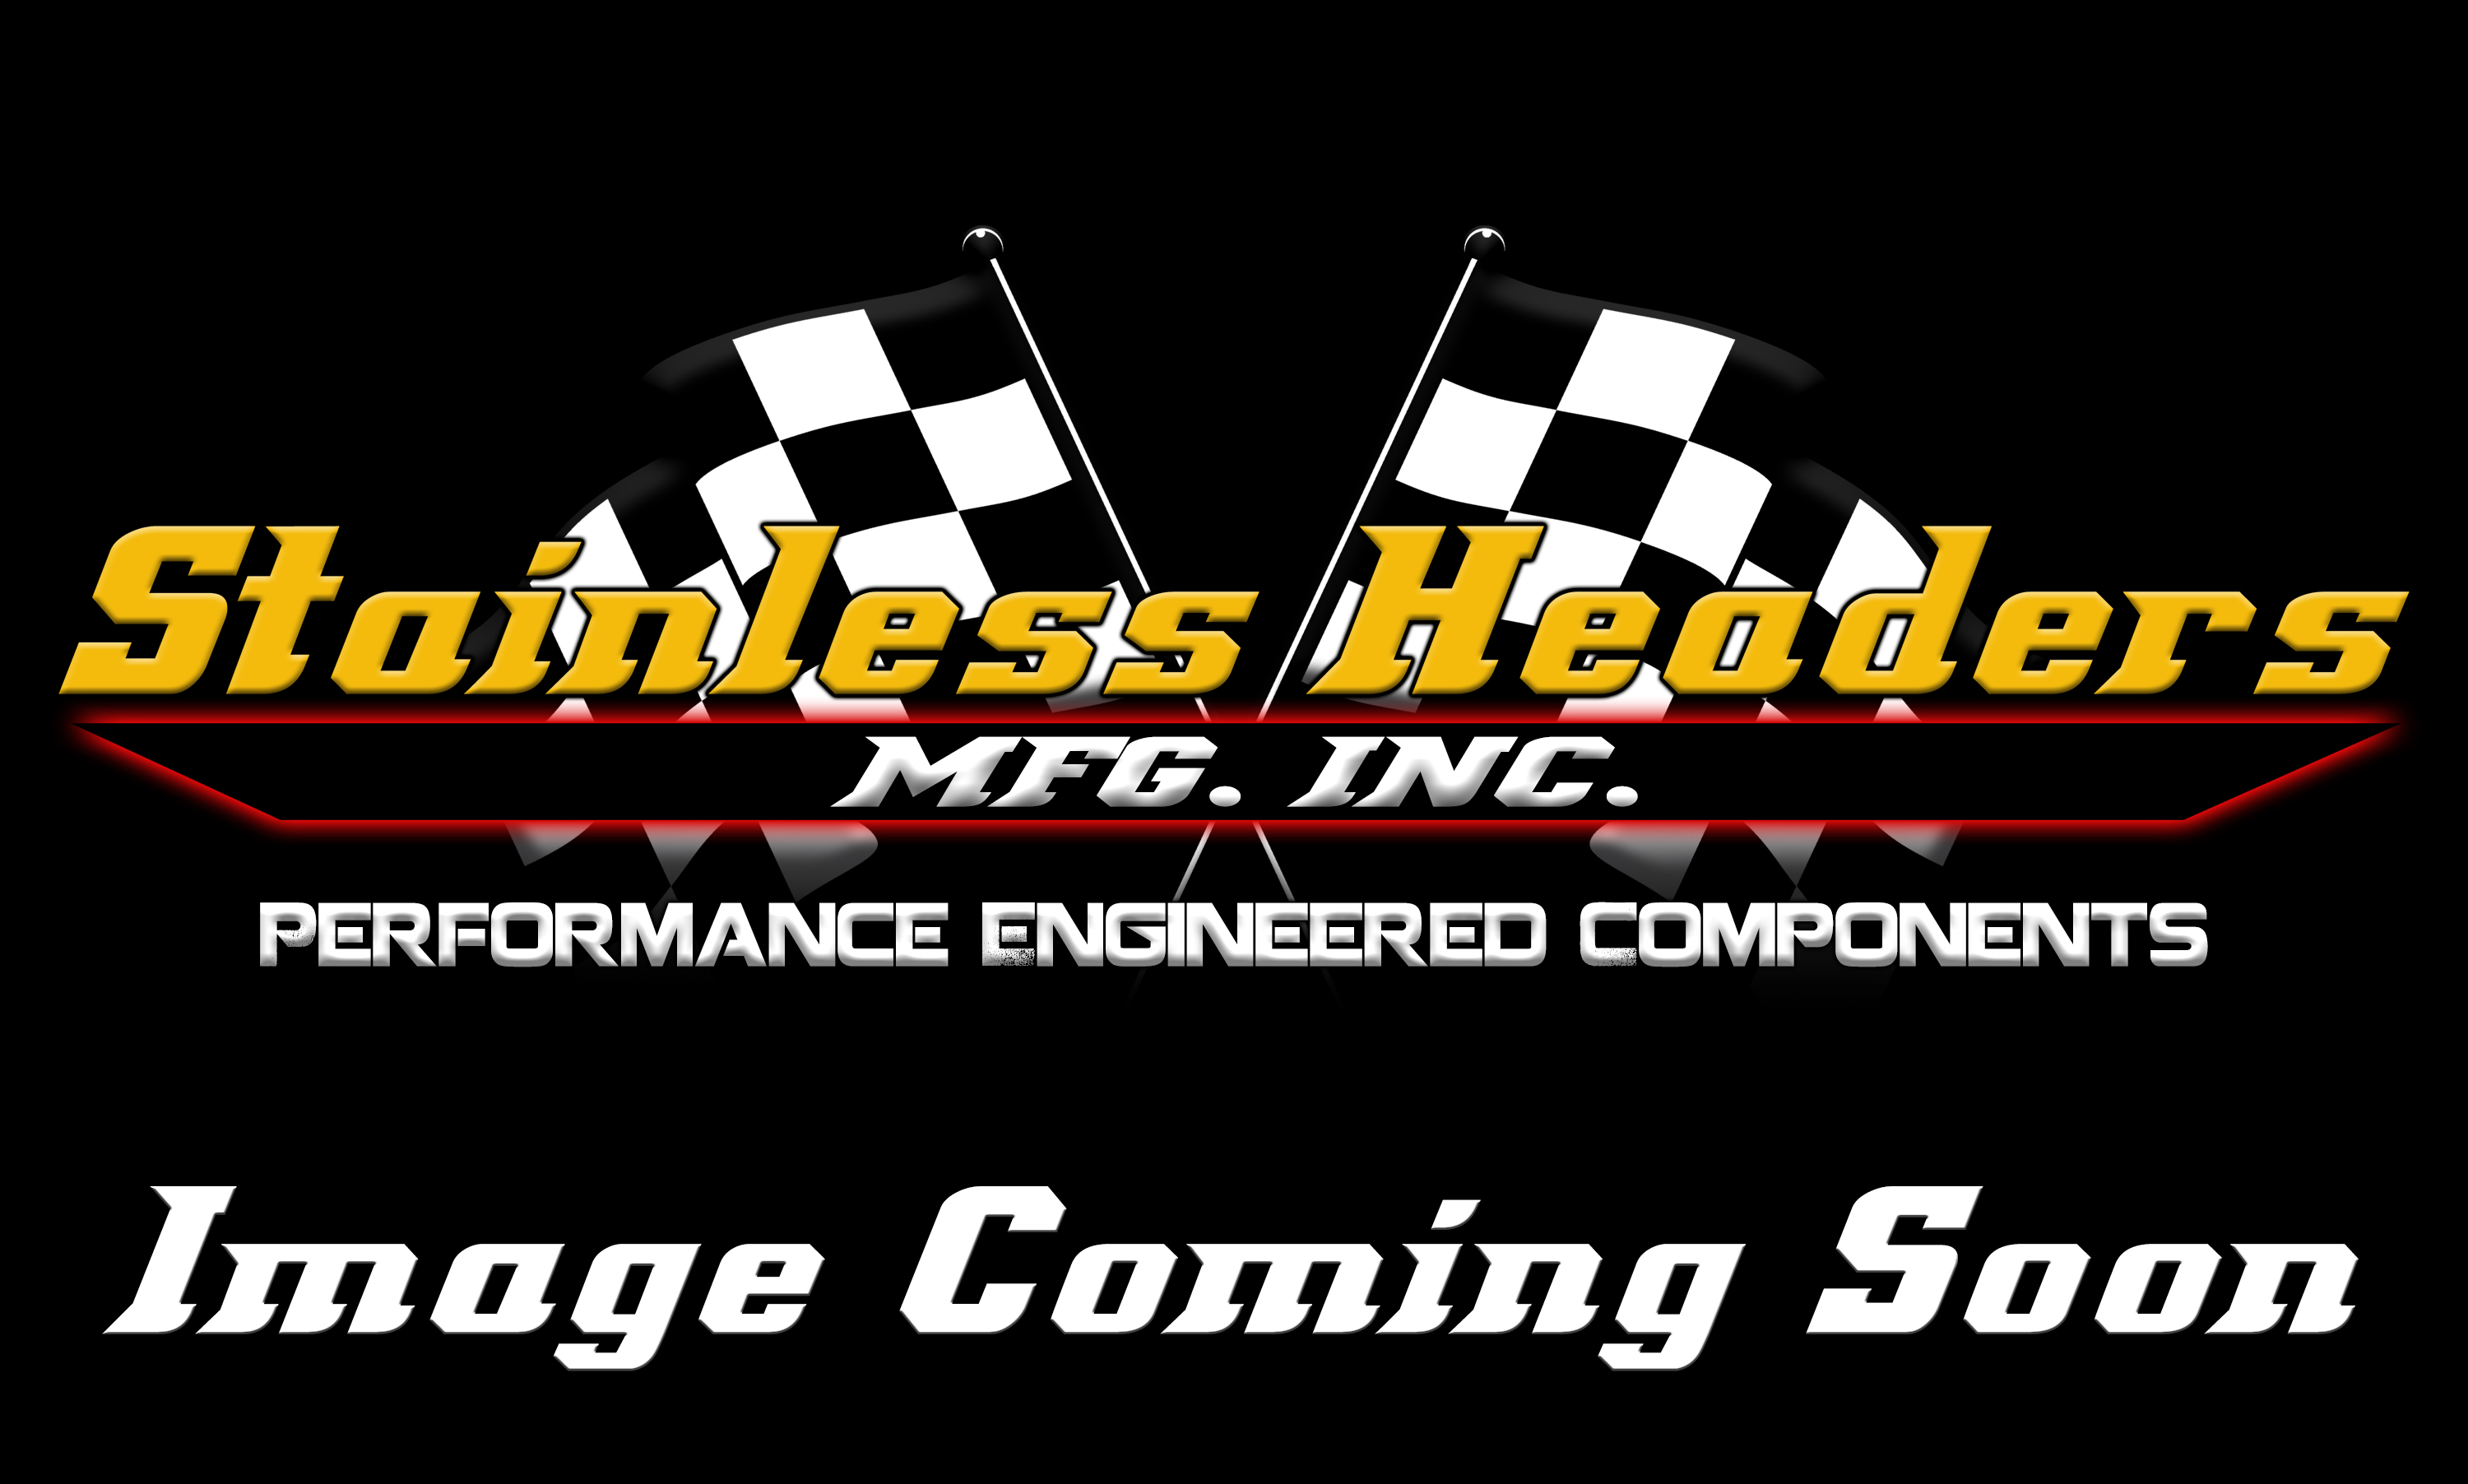 Merge Collectors - 321 Stainless Steel Merge Collectors - Stainless Headers - 2 1/4" Primary 8 into 1 Performance Merge Collector-16ga 321ss